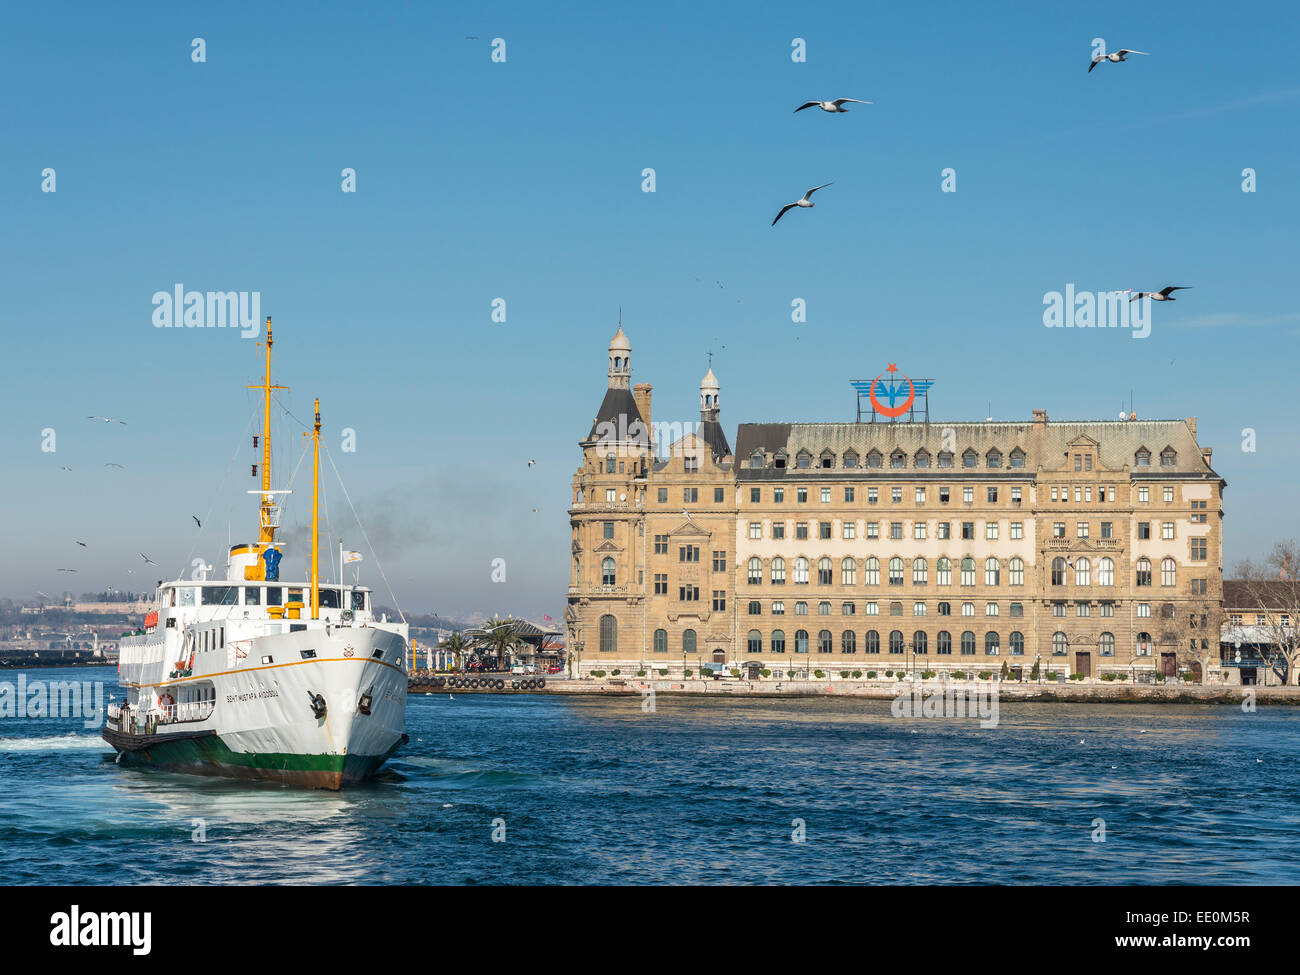 A passenger ferry arriving at Kadikoy on the Asian side of Istanbul with Haydarpasa railway station in the background, Turkey. Stock Photo